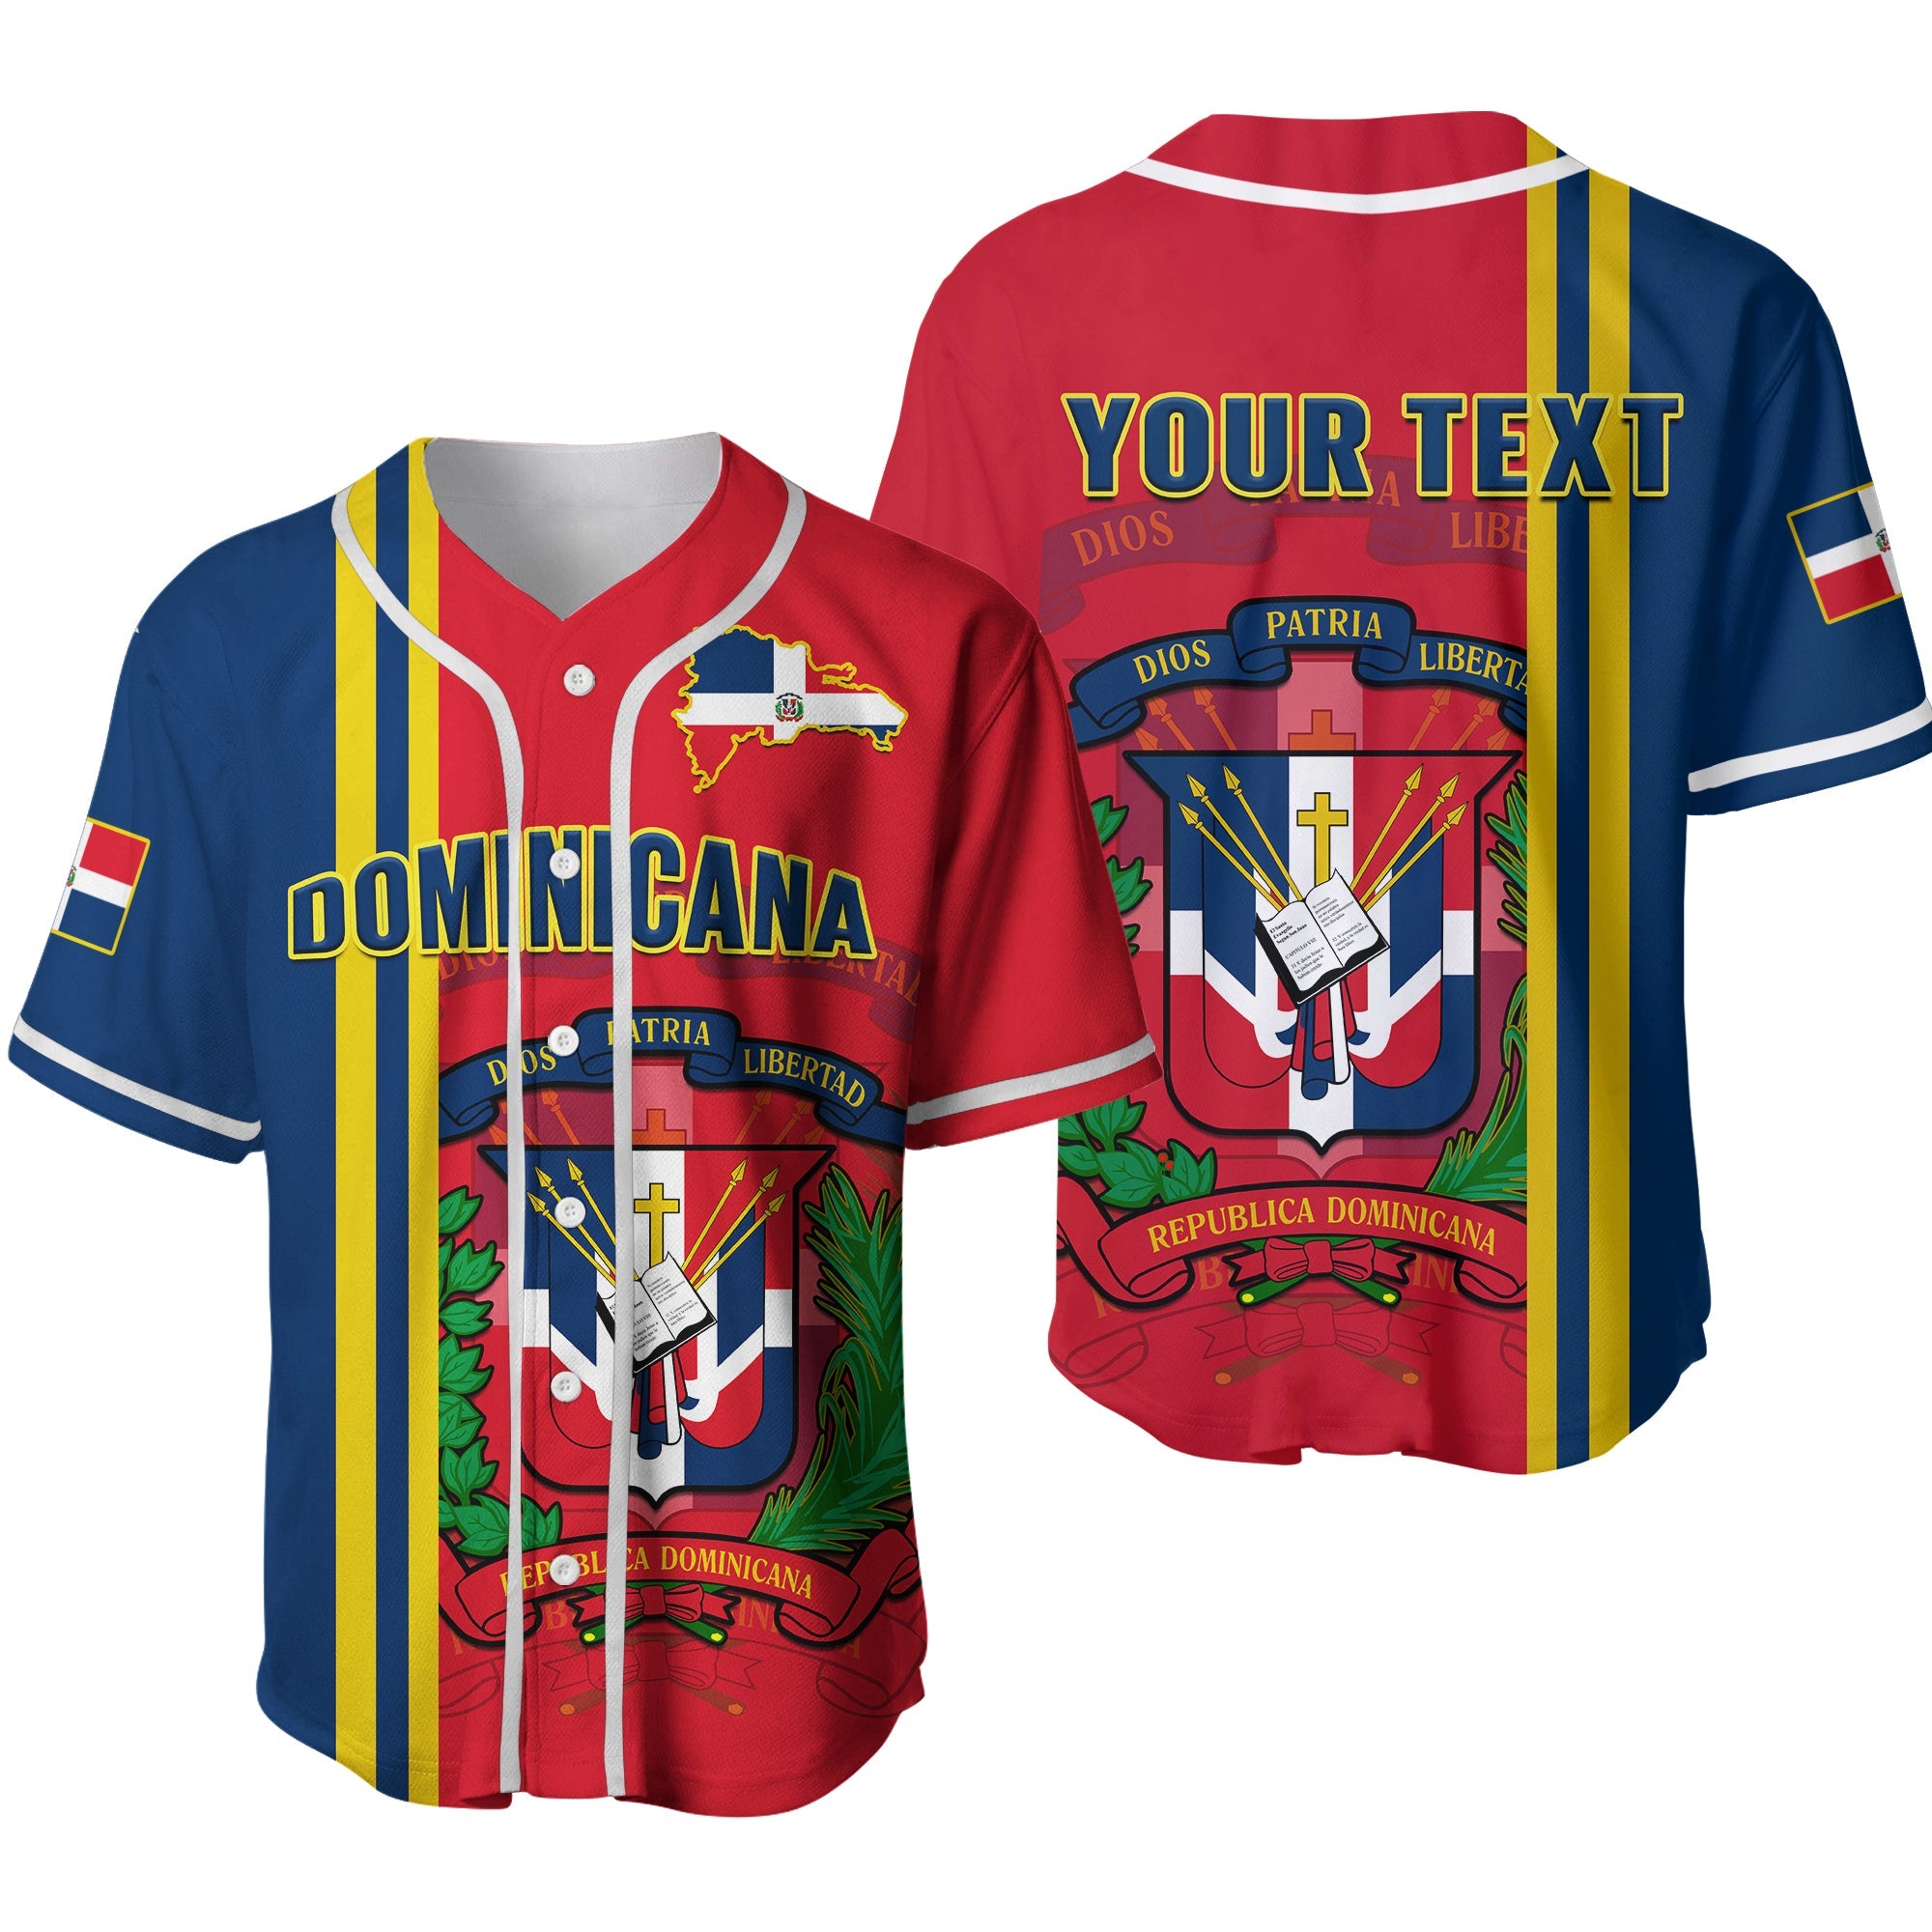 custom-personalised-dominican-republic-baseball-jersey-happy-179-years-of-independence-ver02